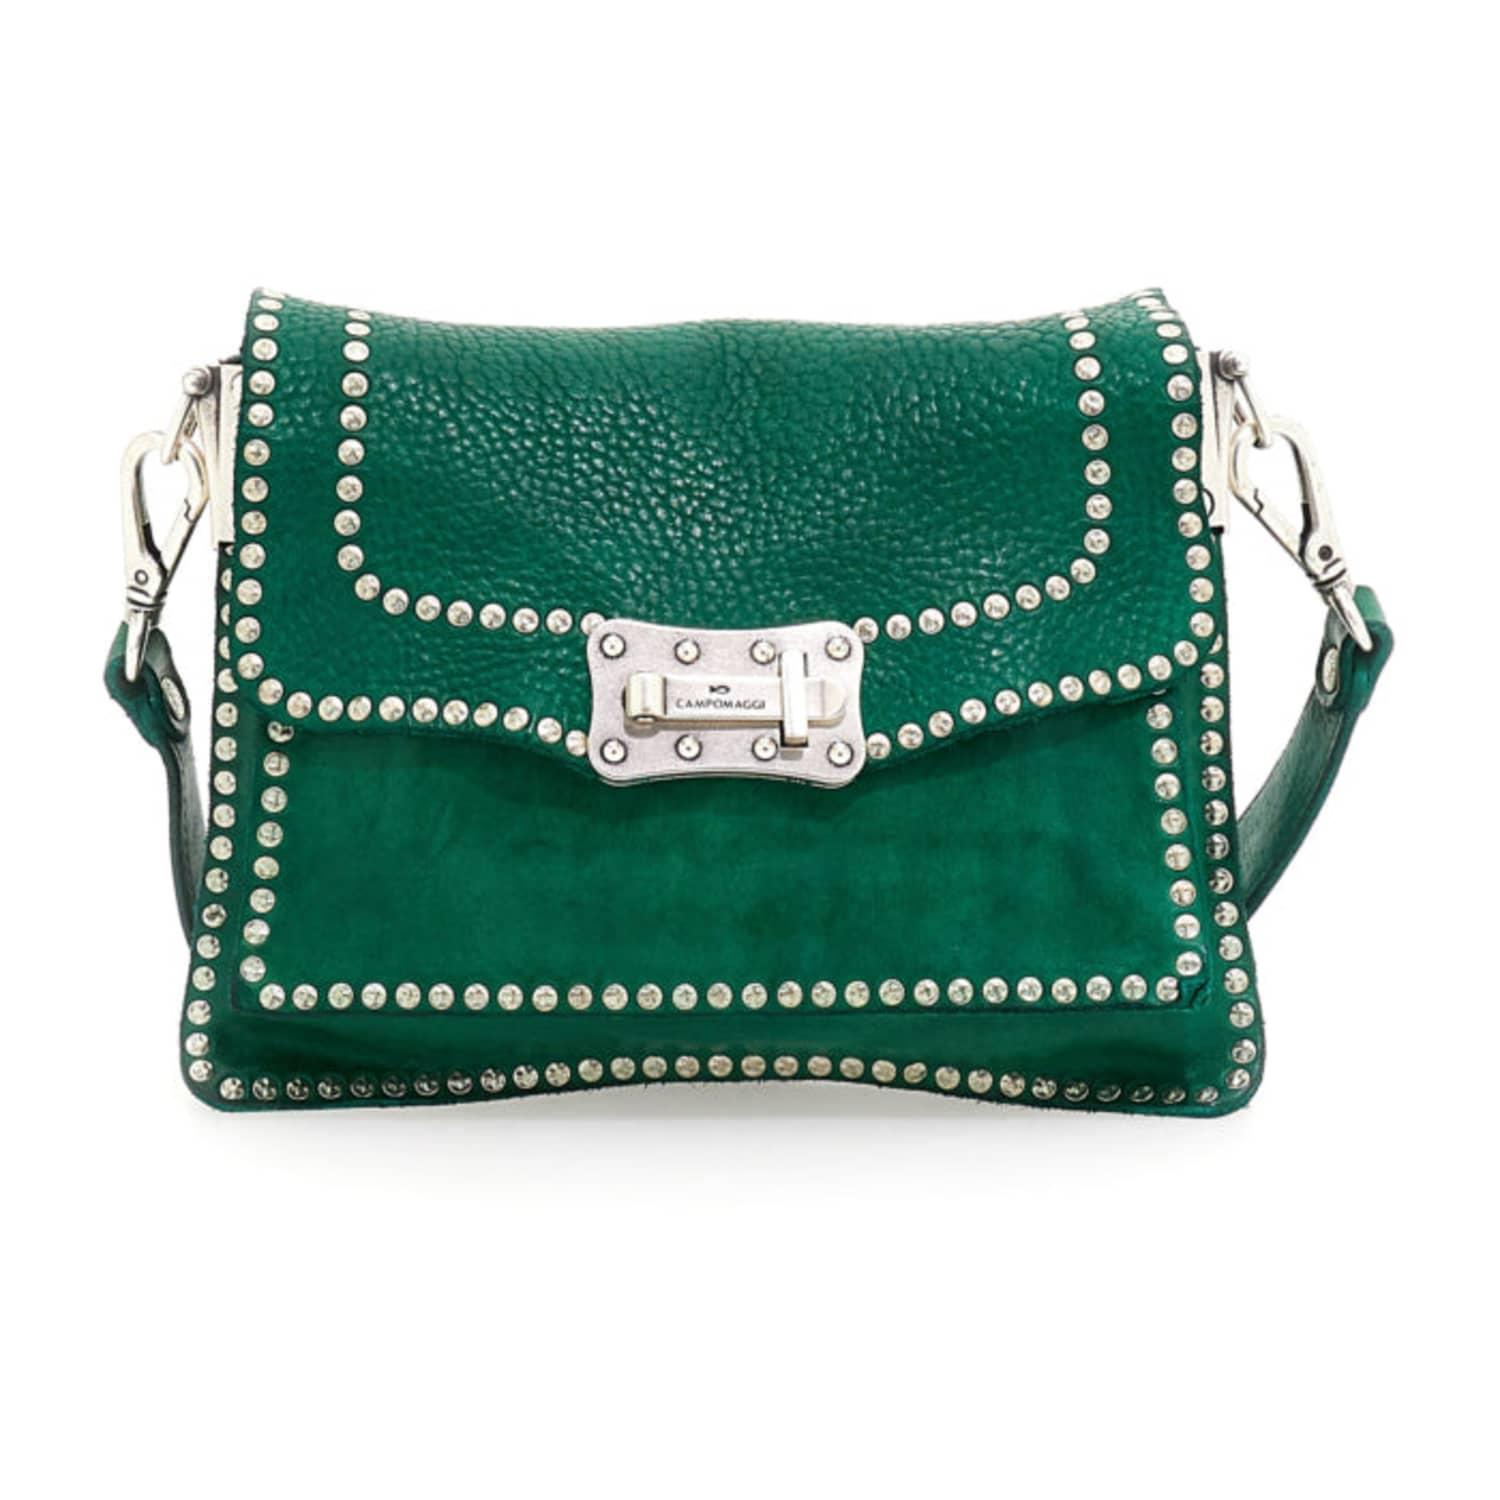 Campomaggi Agnese Co22460nd Meadow Bag in Green | Lyst